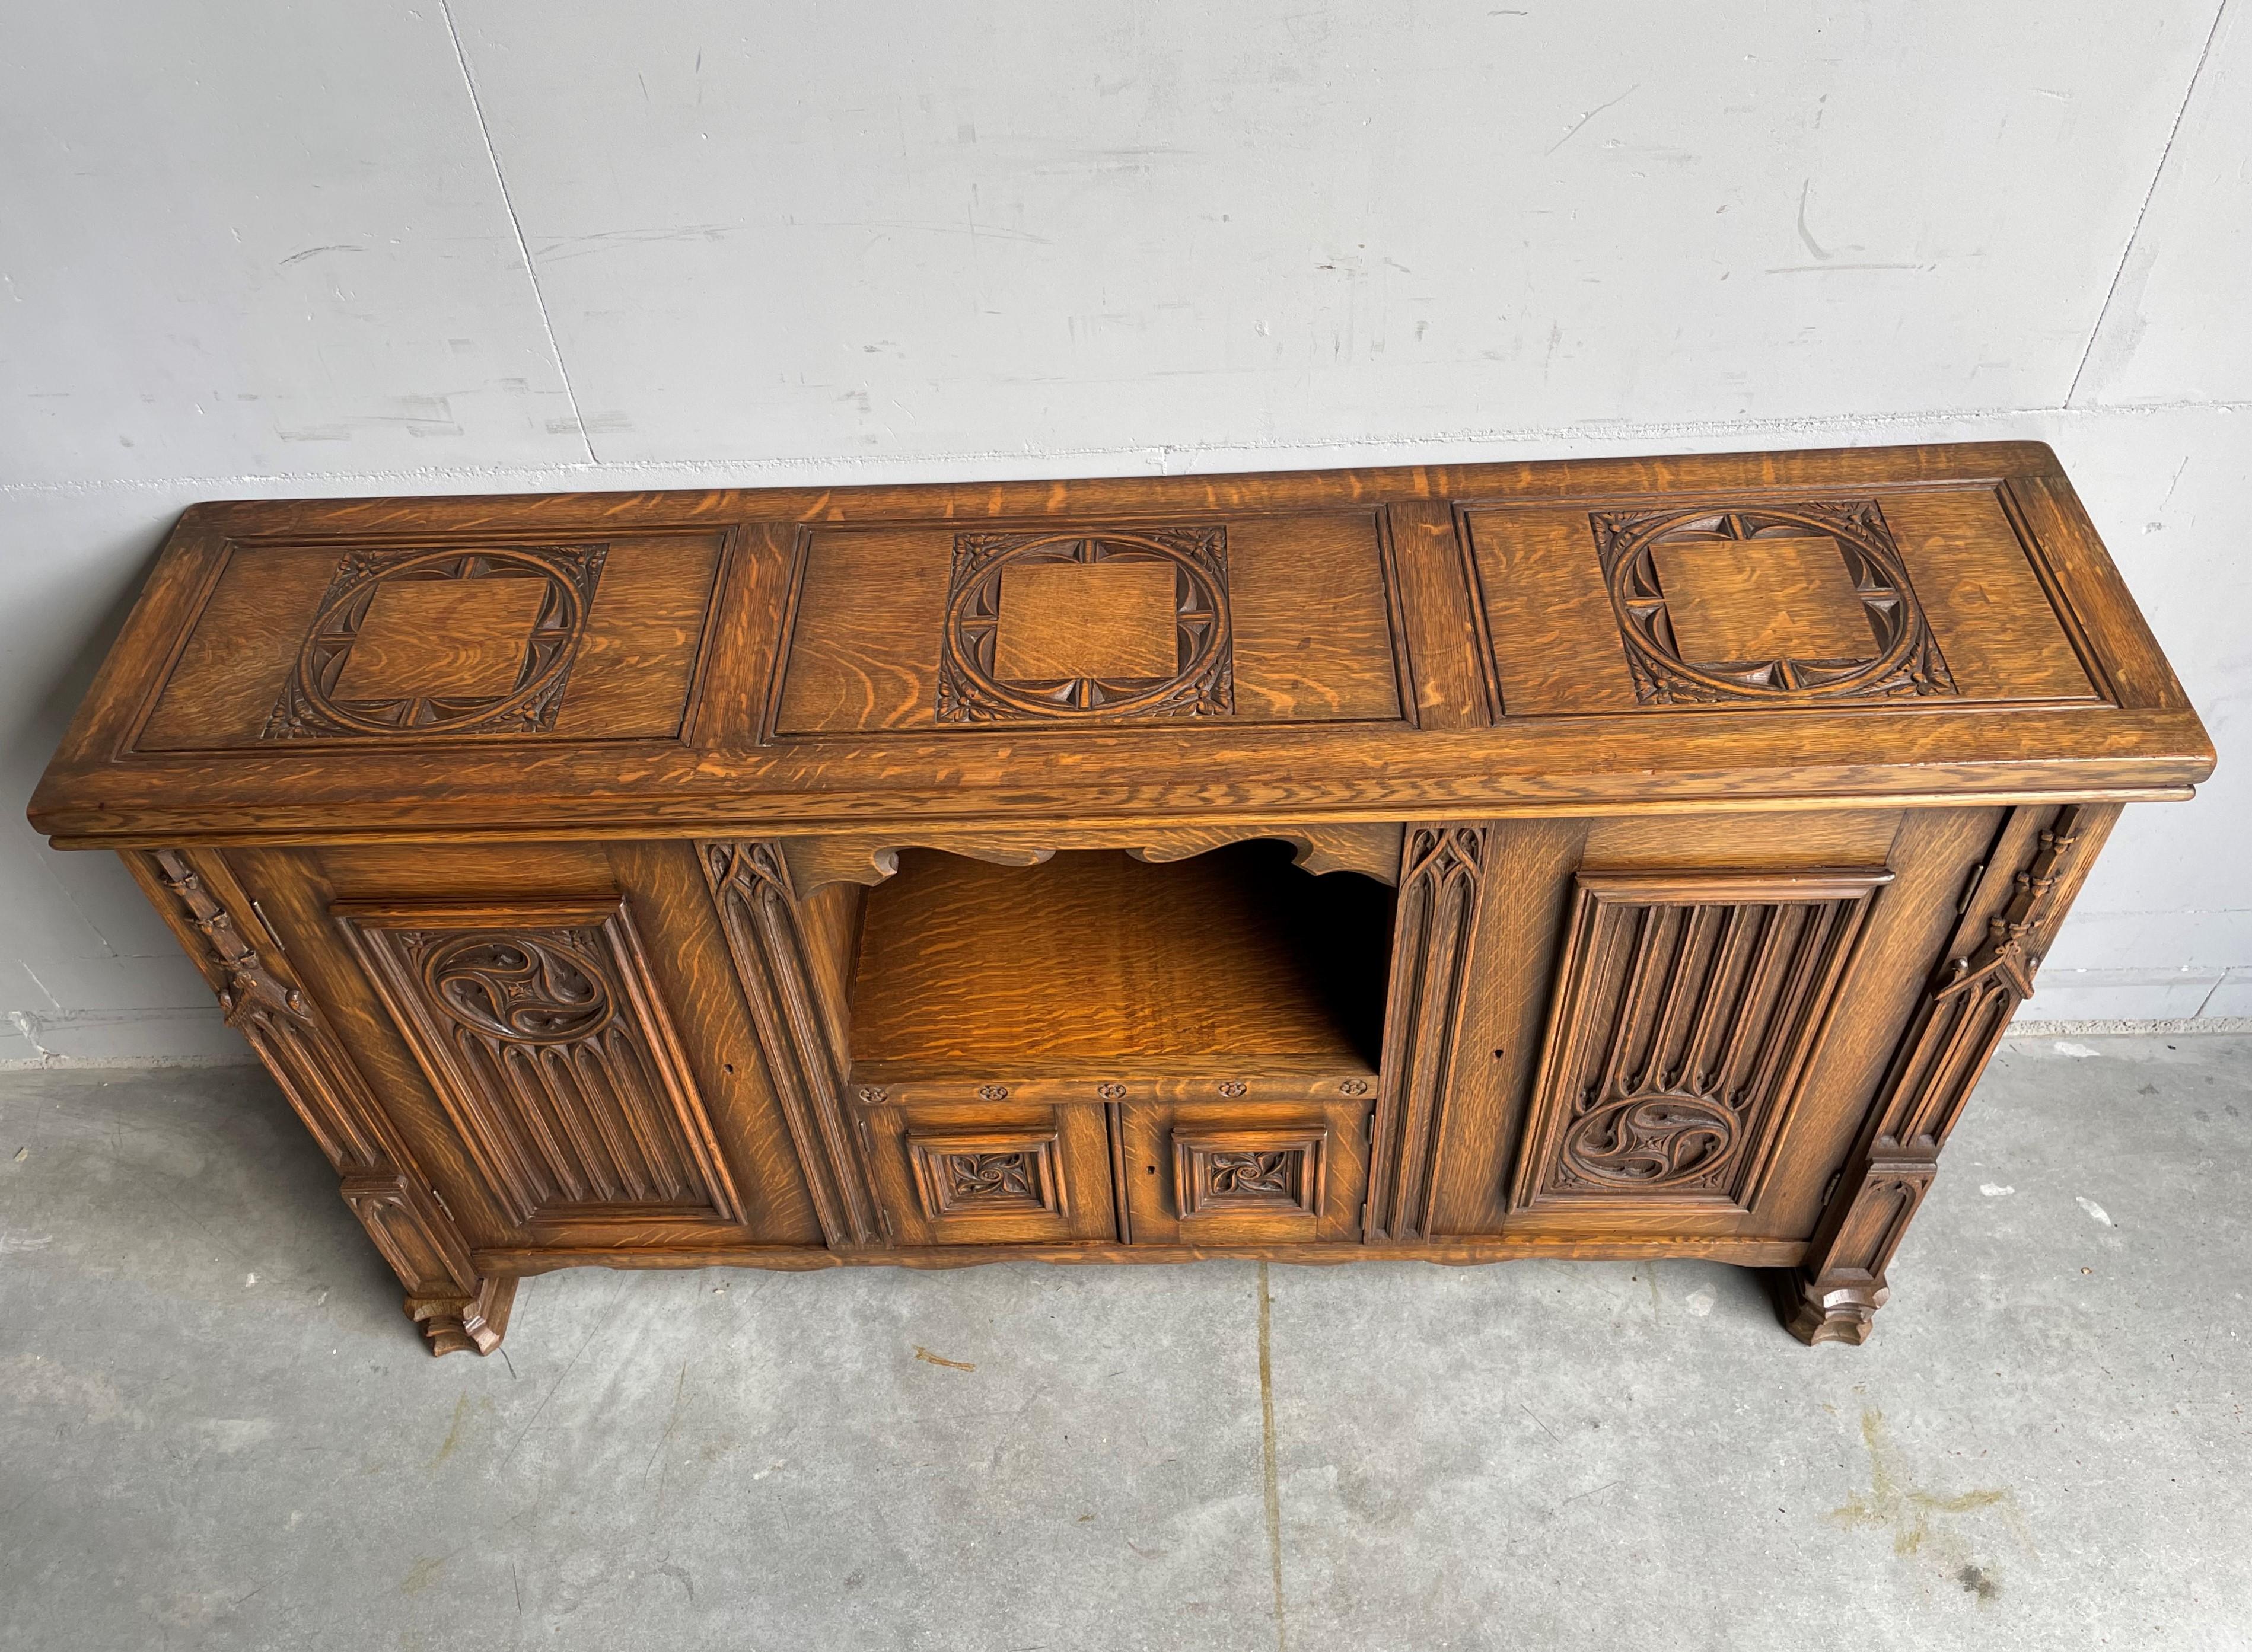 Hand-Crafted Gothic Revival Solid Oak Sideboard / Sidetable / 1930s Small 4-Door Credenza